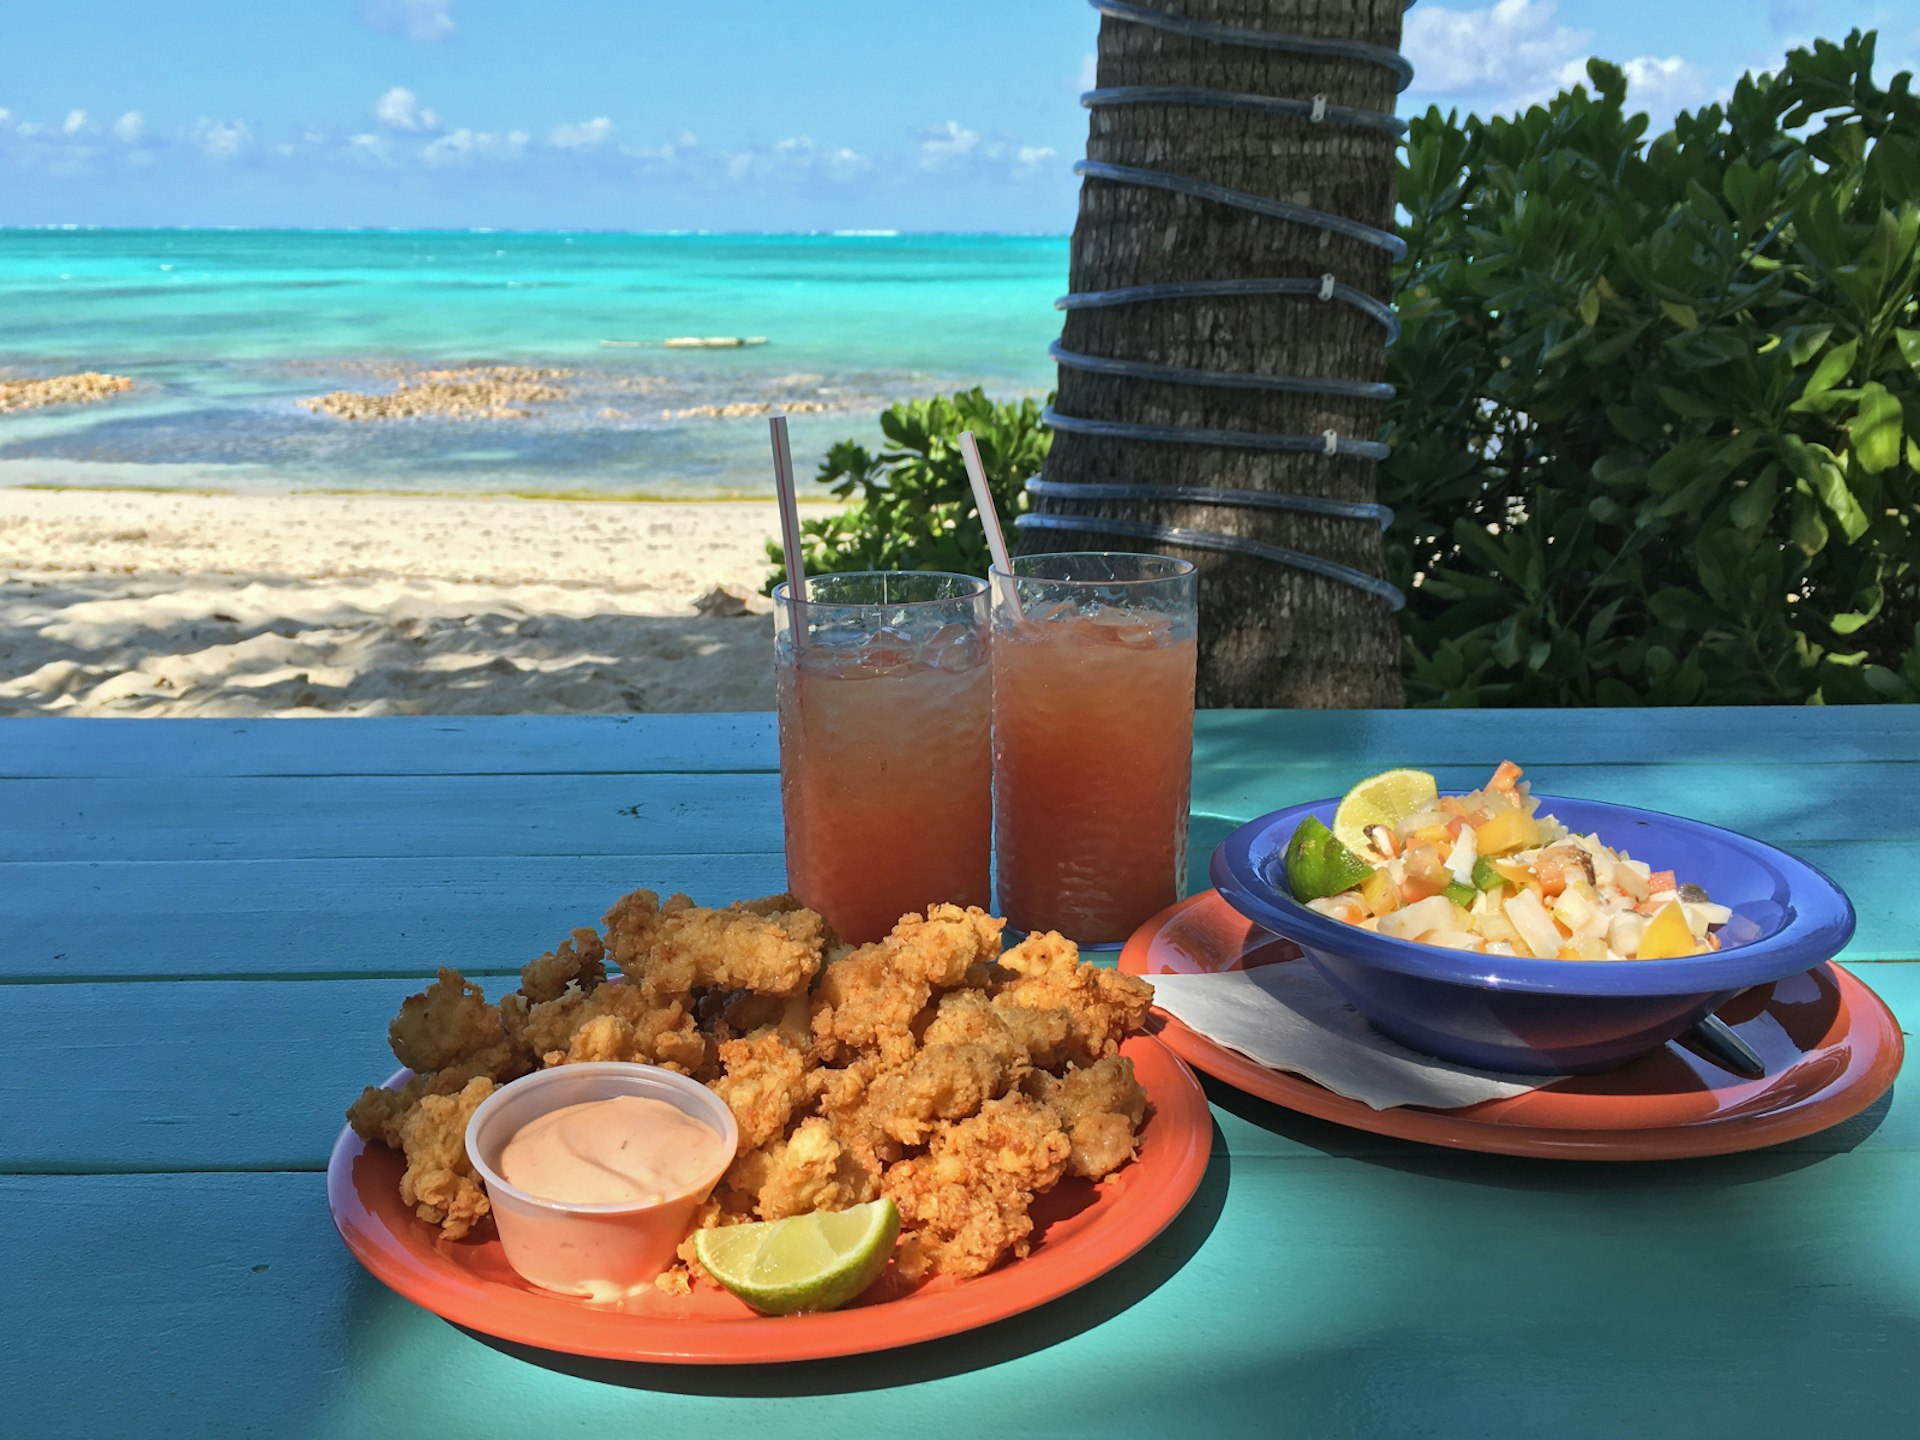 Conch fritters, similar to clams or scallops, are served year-round in the Cayman Islands © MevZup / Shutterstock